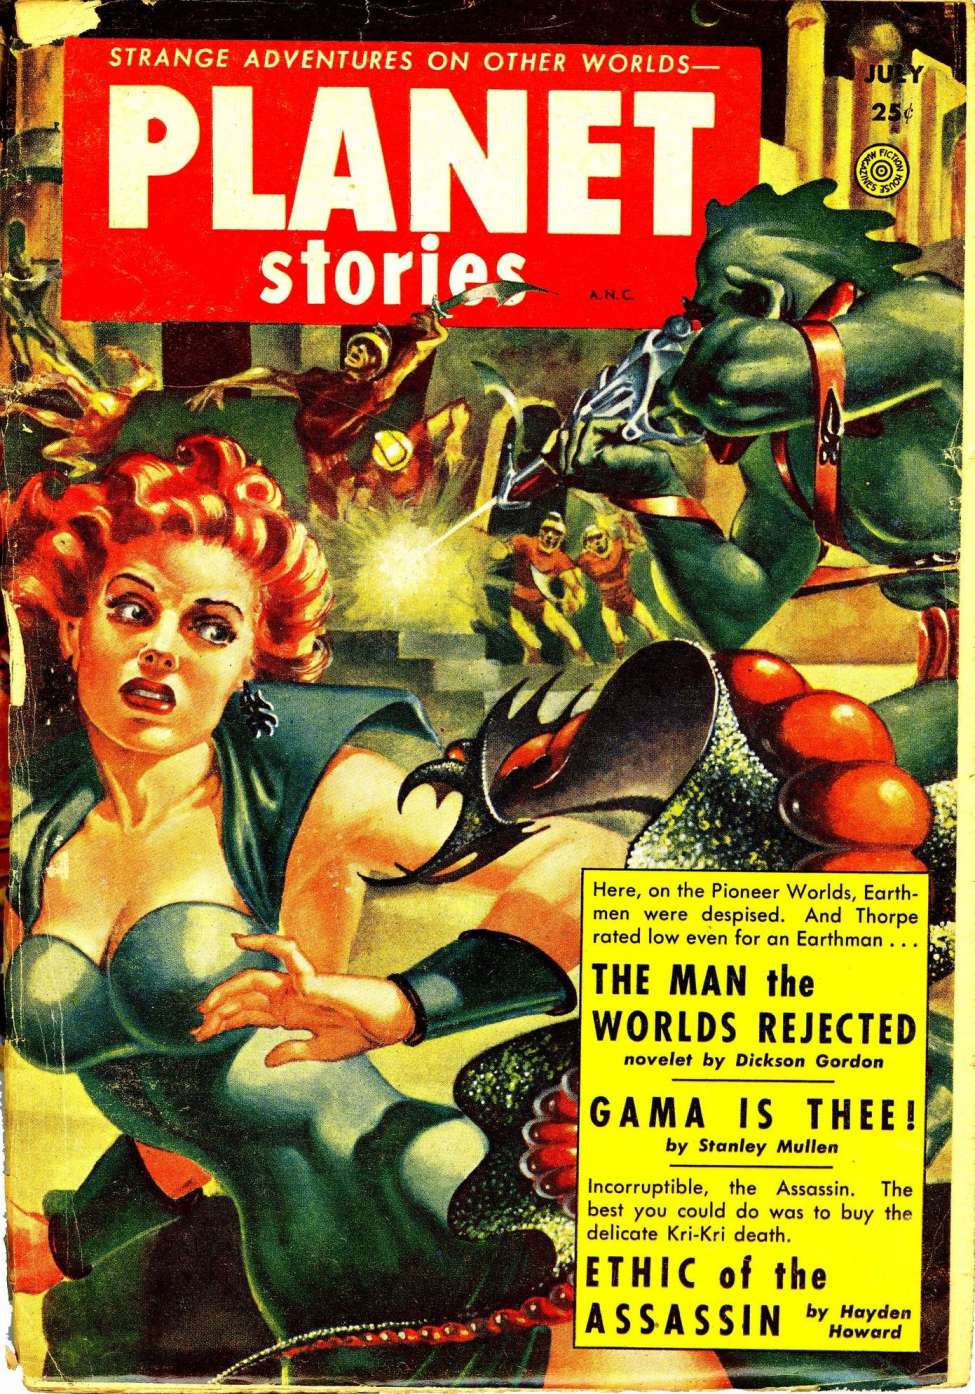 Comic Book Cover For Planet Stories v6 1 - The Man the Worlds Rejected - Dickson Gordon